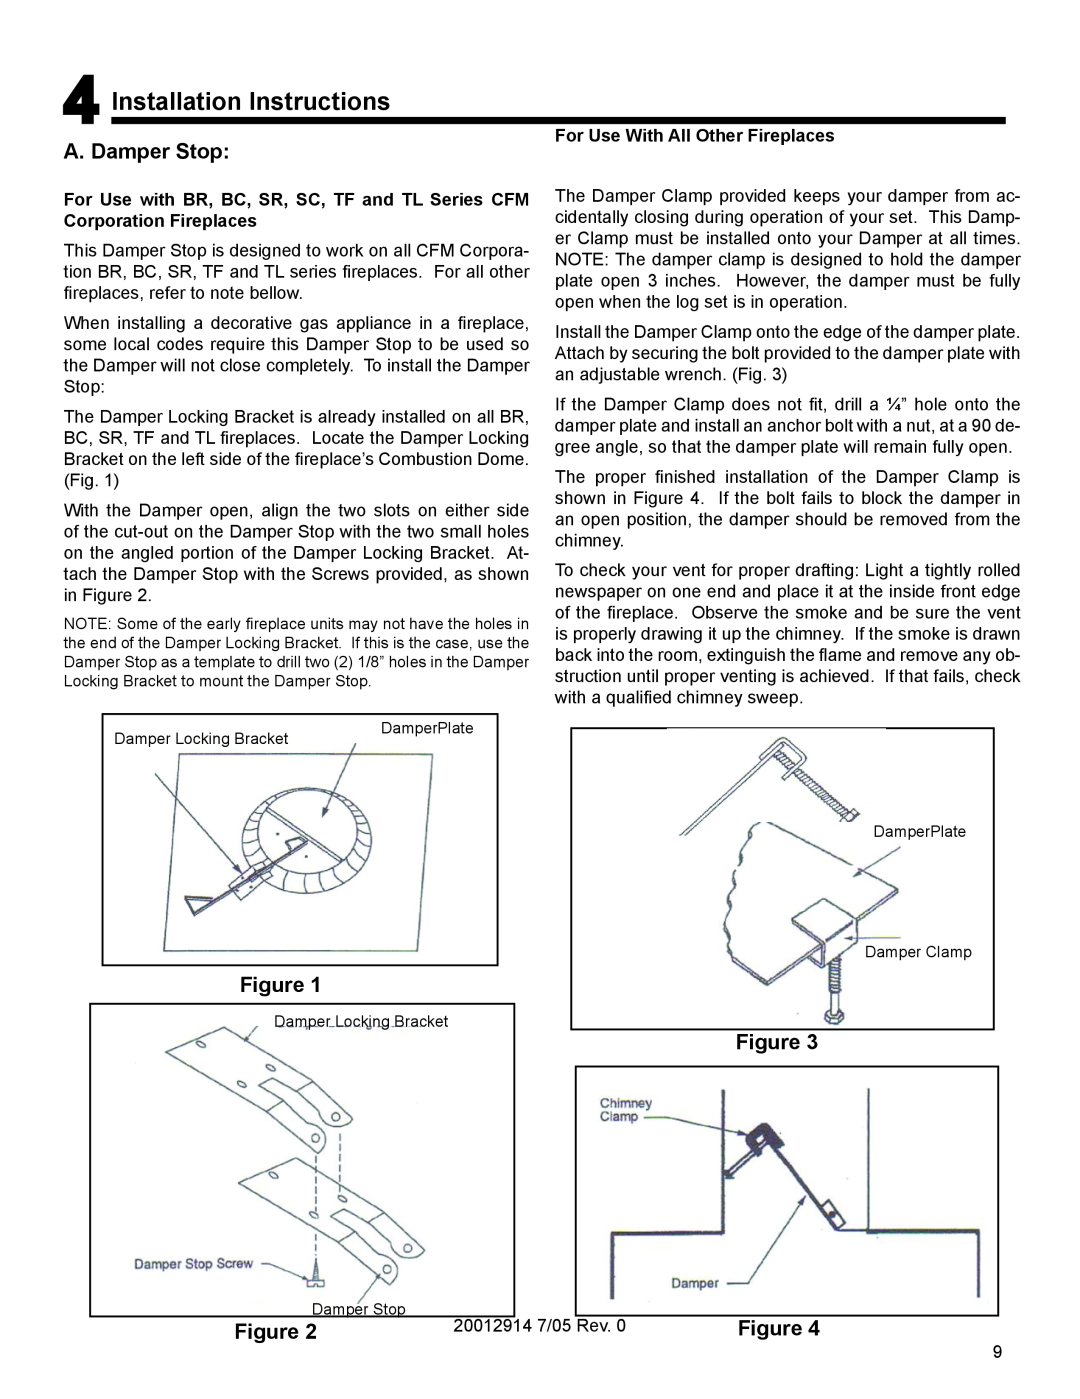 Vermont Casting MO18 Installation Instructions, A. Damper Stop, For Use With All Other Fireplaces, Corporation Fireplaces 